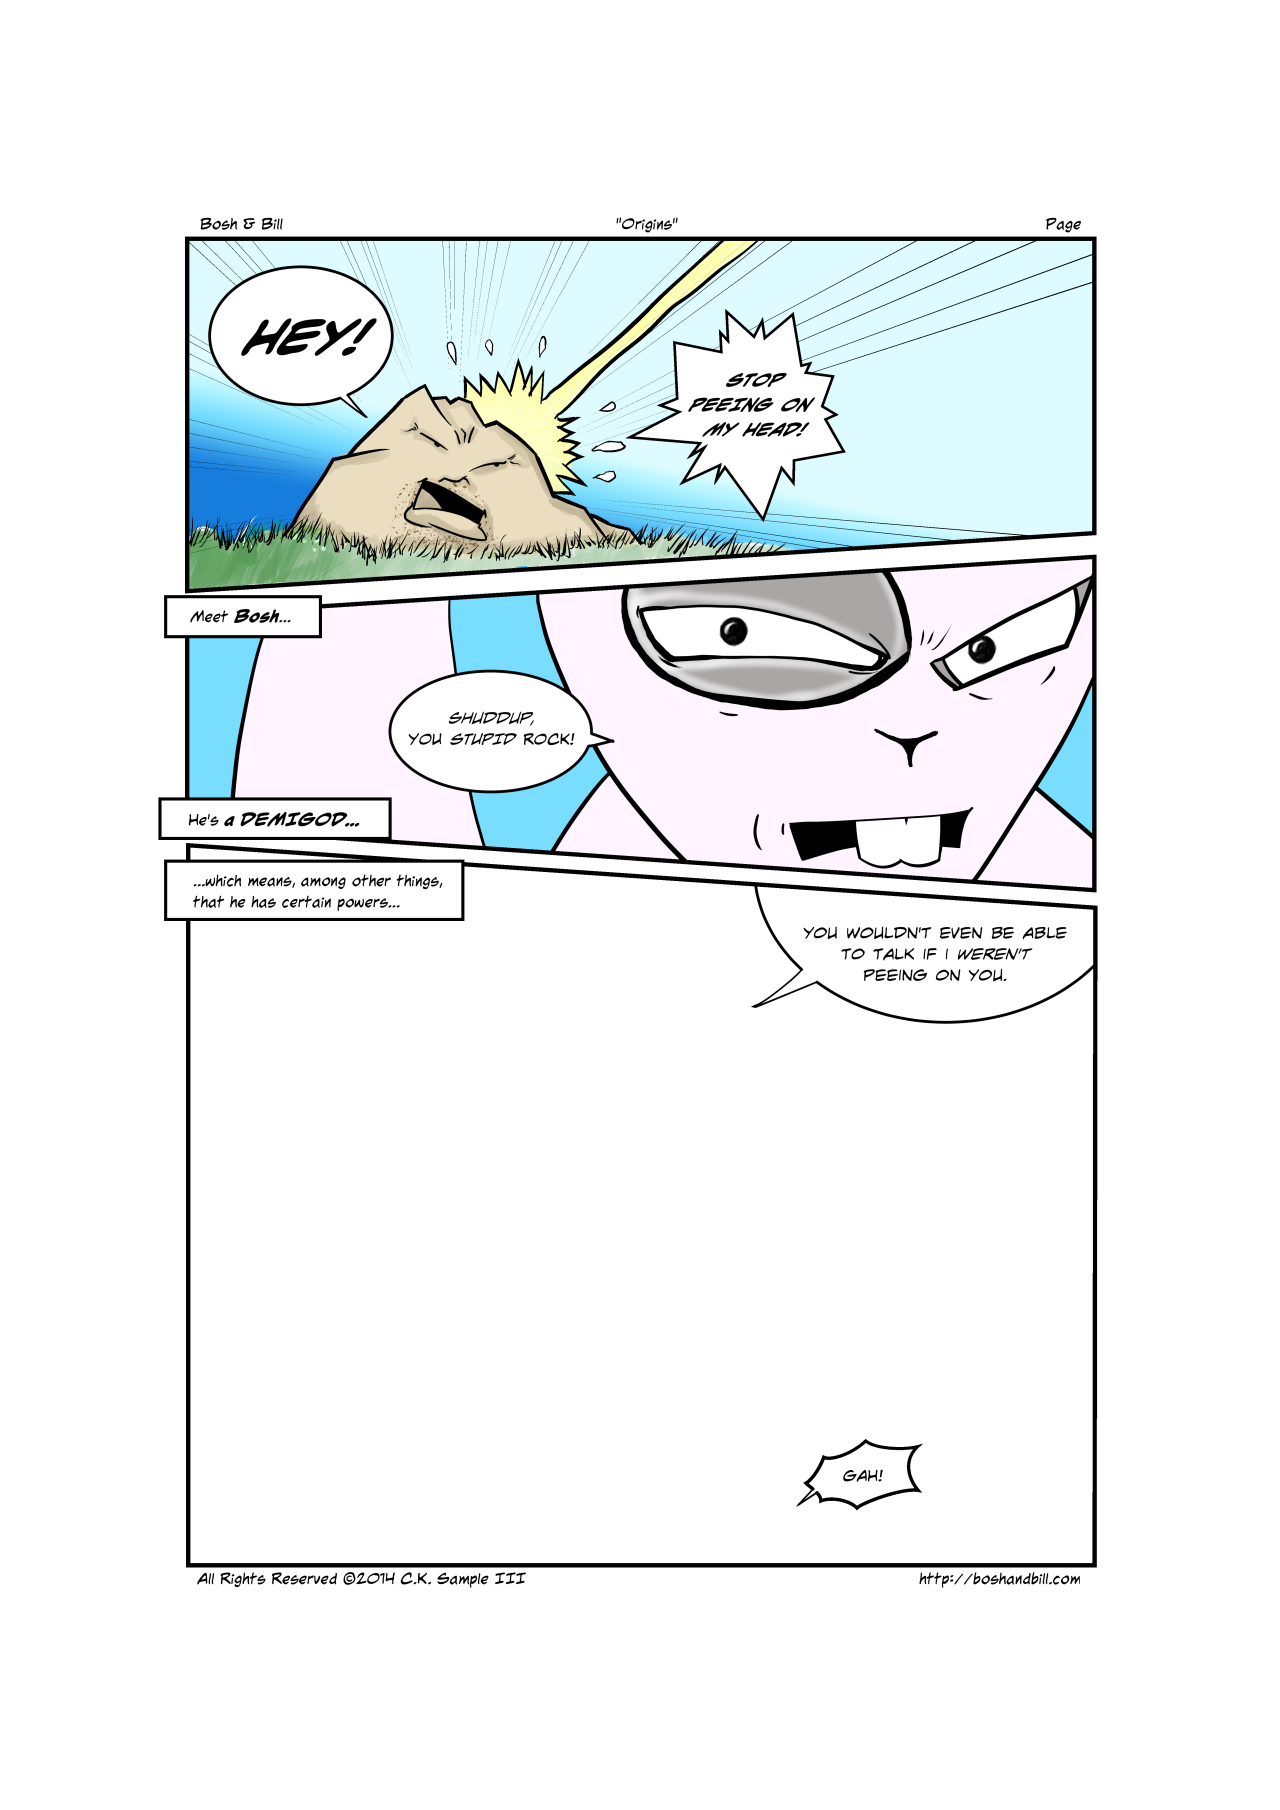 I’m rethinking Page 1 Panel 3 after some more feedback at reddit. While it was good in terms of cranking the page out, I had totally half-assed the panel and made everything very flat and blah for the sake of expediency. So I’ll be redrawing it with...